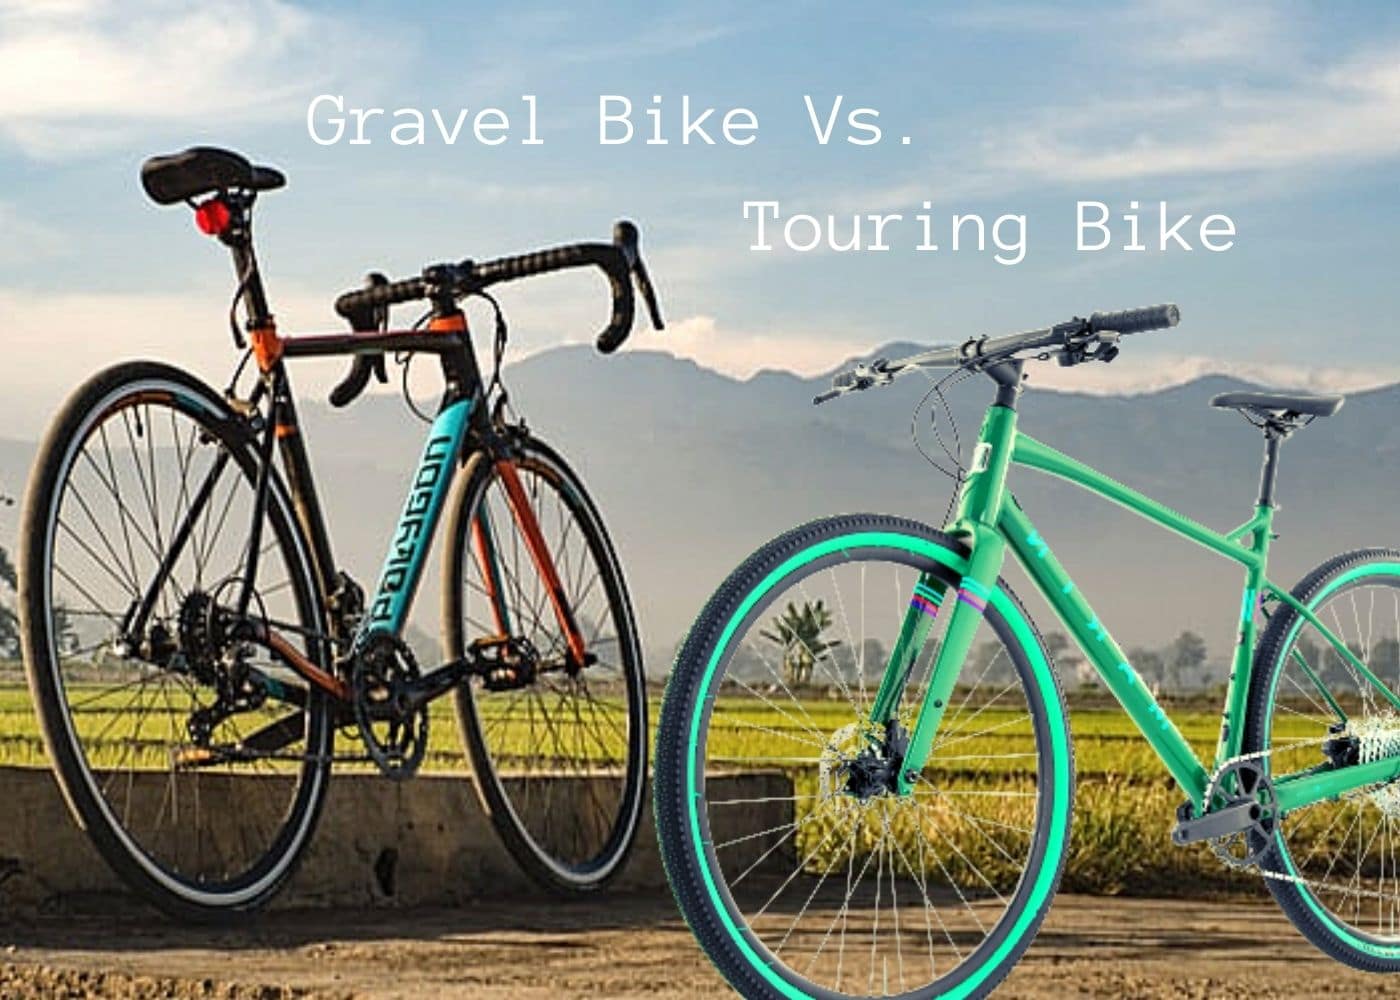 Featured image for Gravel Bike vs Touring Bike article